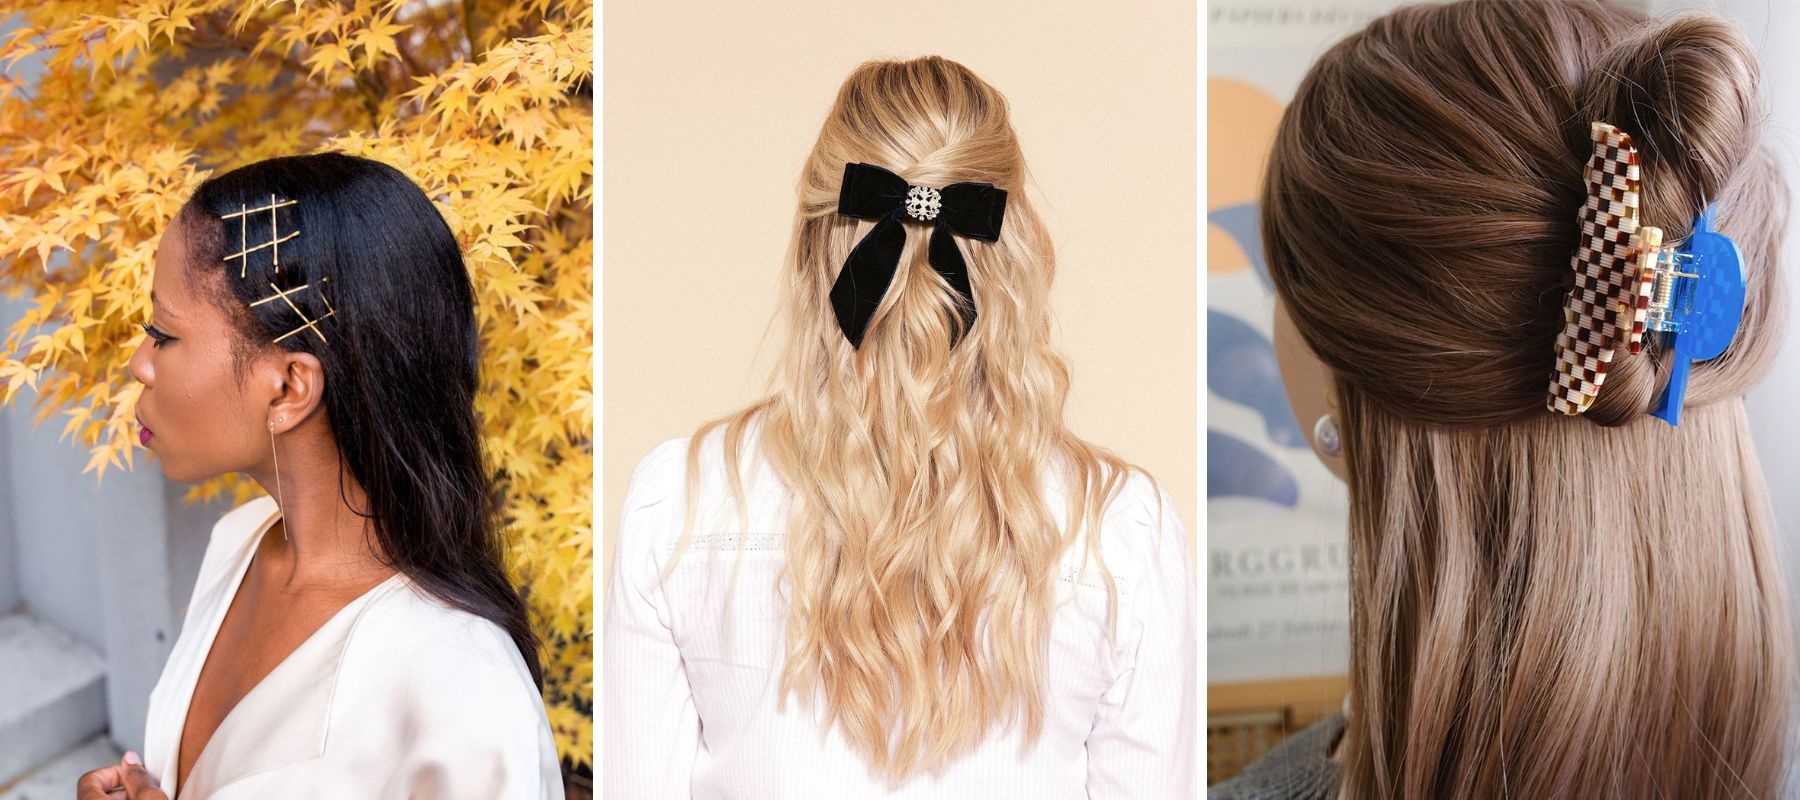 (15+ Looks) The Hair Clip Trend: A 90s Statement That Returned As An Aesthetic